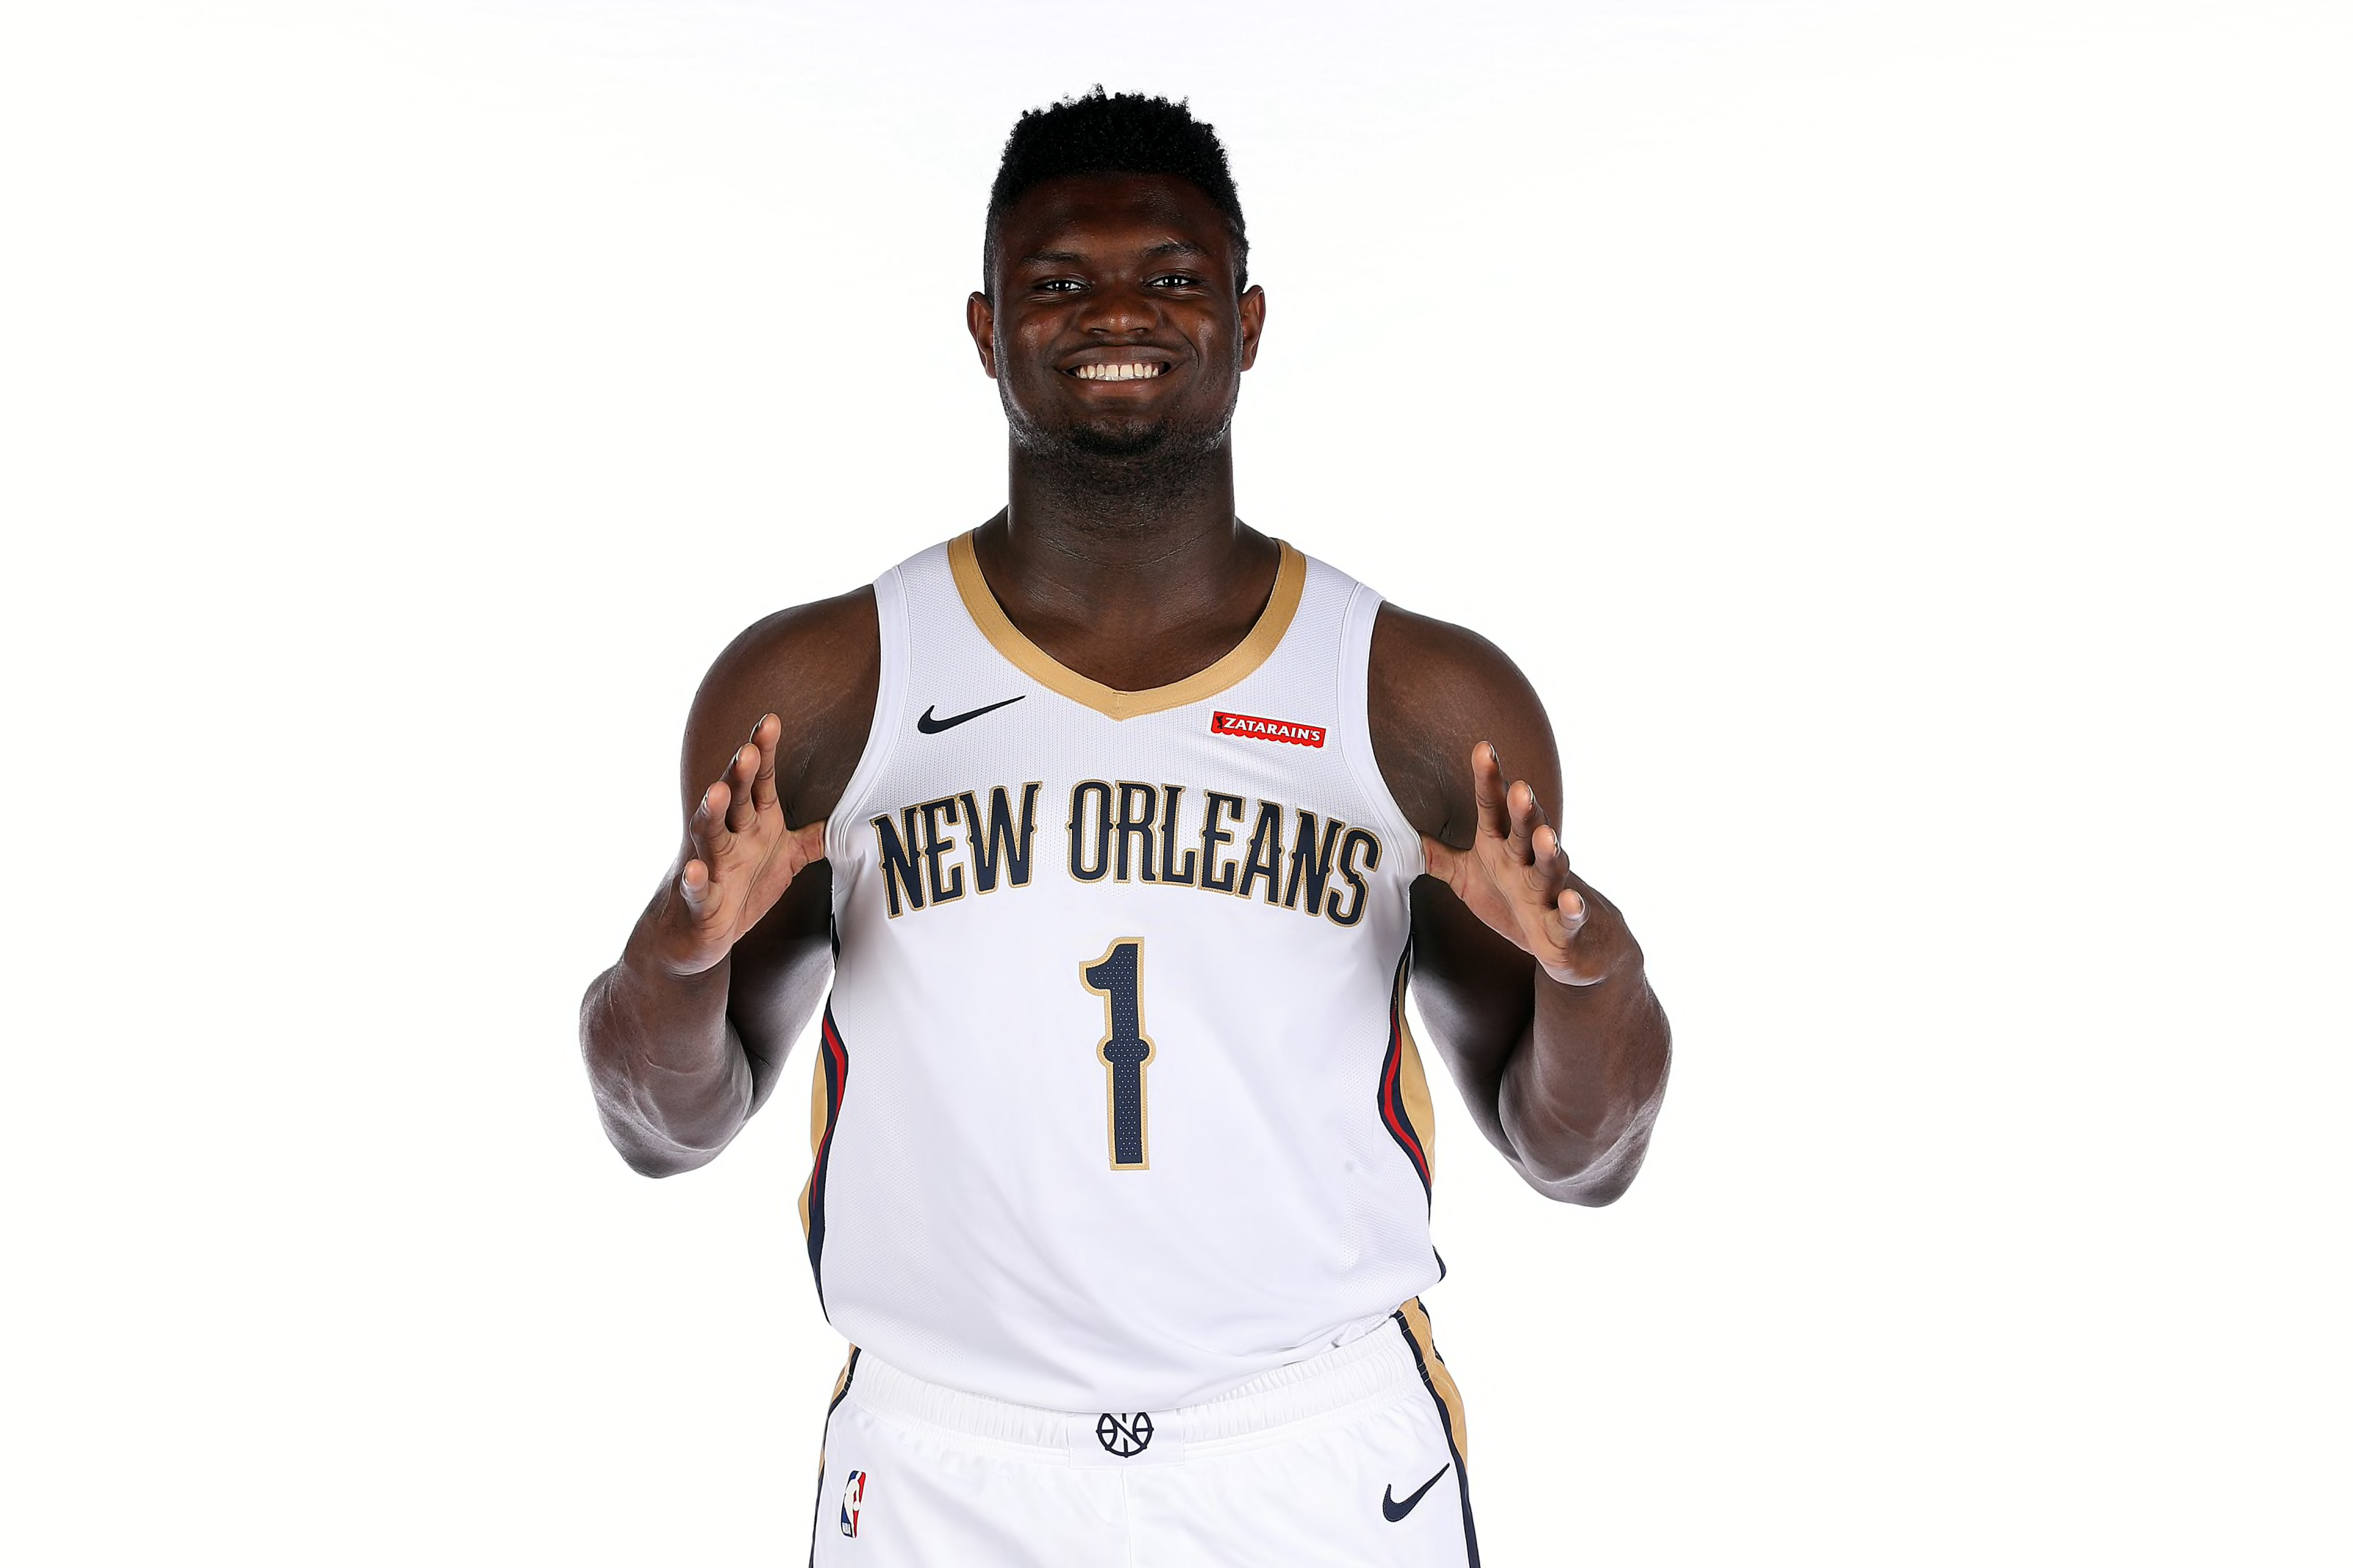 New Orleans Pelicans The 5 Biggest Takeaways From Media Day